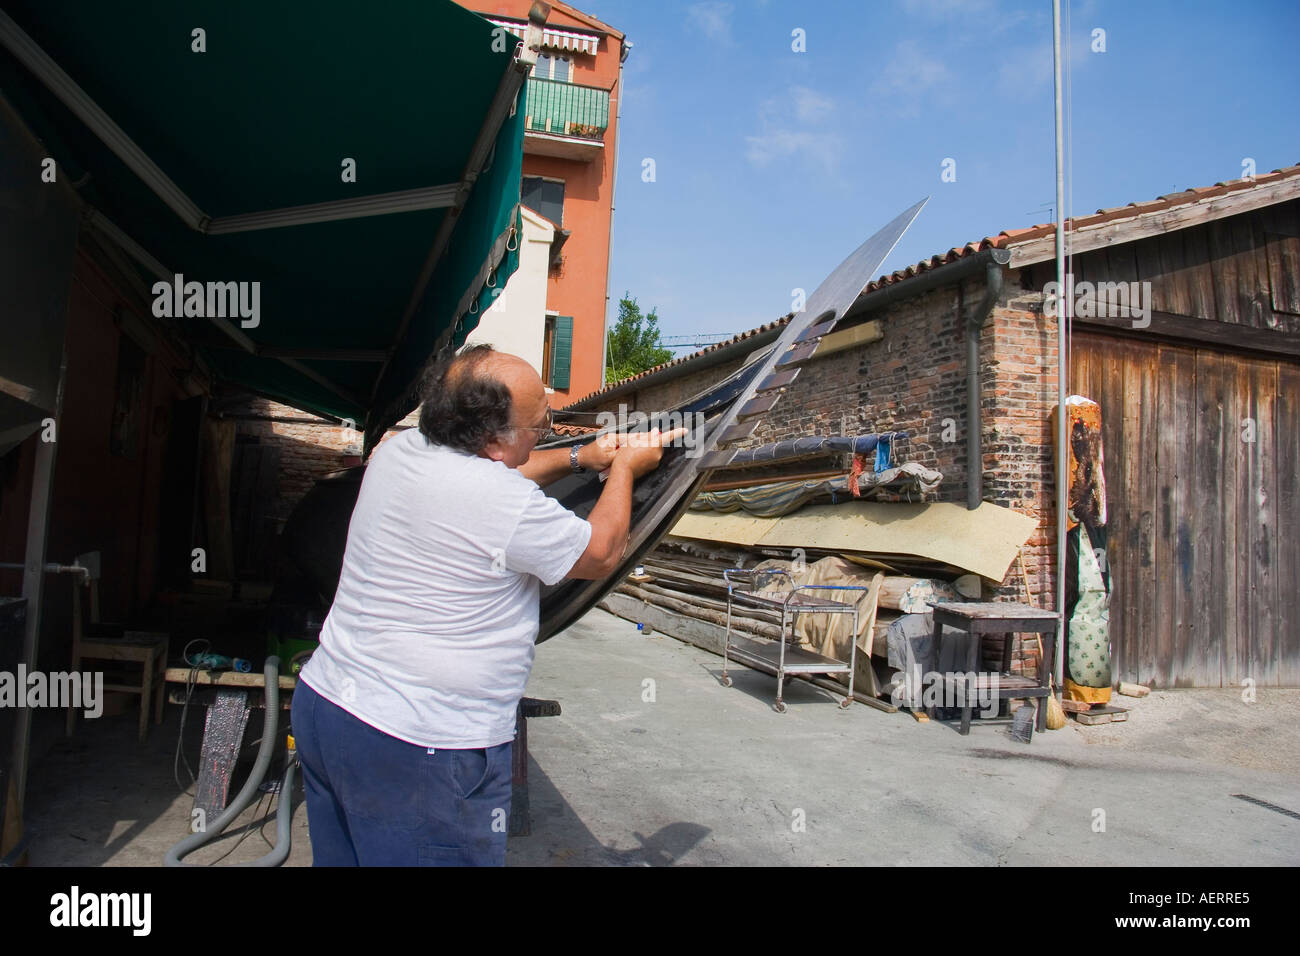 Craftsman using chisel to scrap paint on gondola in the boatyard of D Tramontin Figli Venice Italy Stock Photo